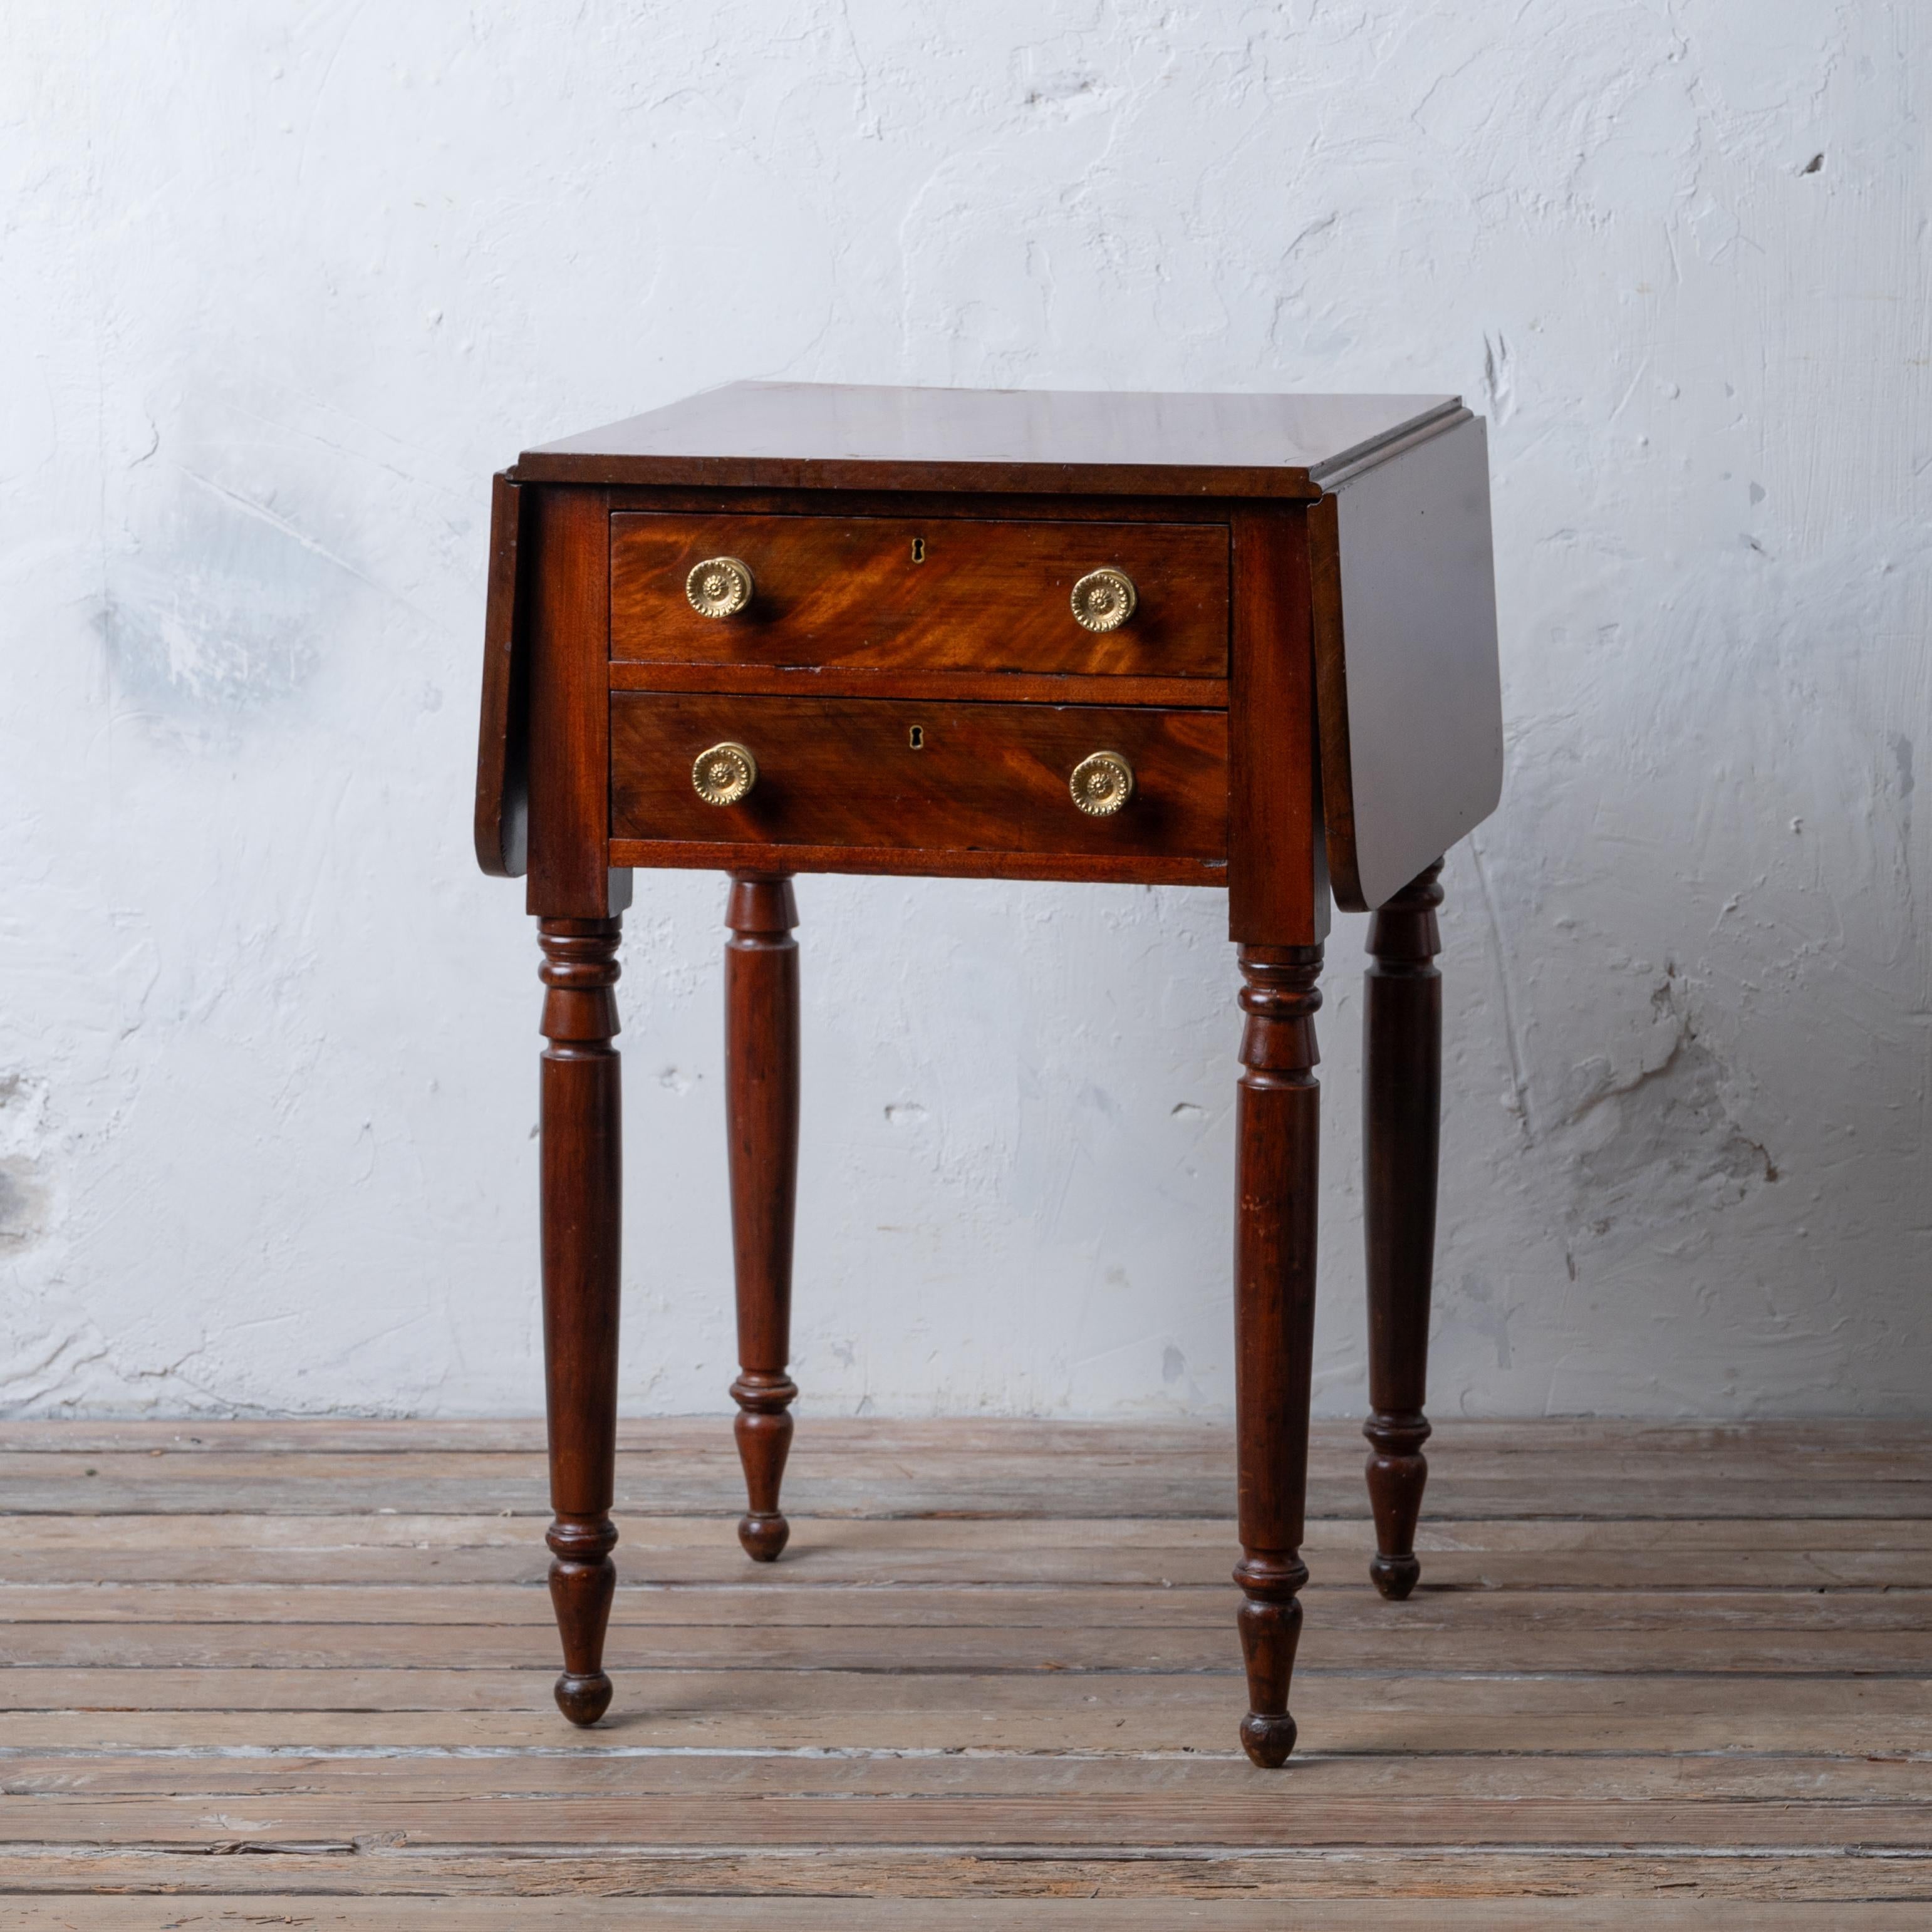 A Sheraton Mahogany two drawer drop leaf work table, American, circa 1830s.

19 ½ inches wide by 18 ½ inches deep by 29 inches tall; leafs extended, 36 ¼ inches

